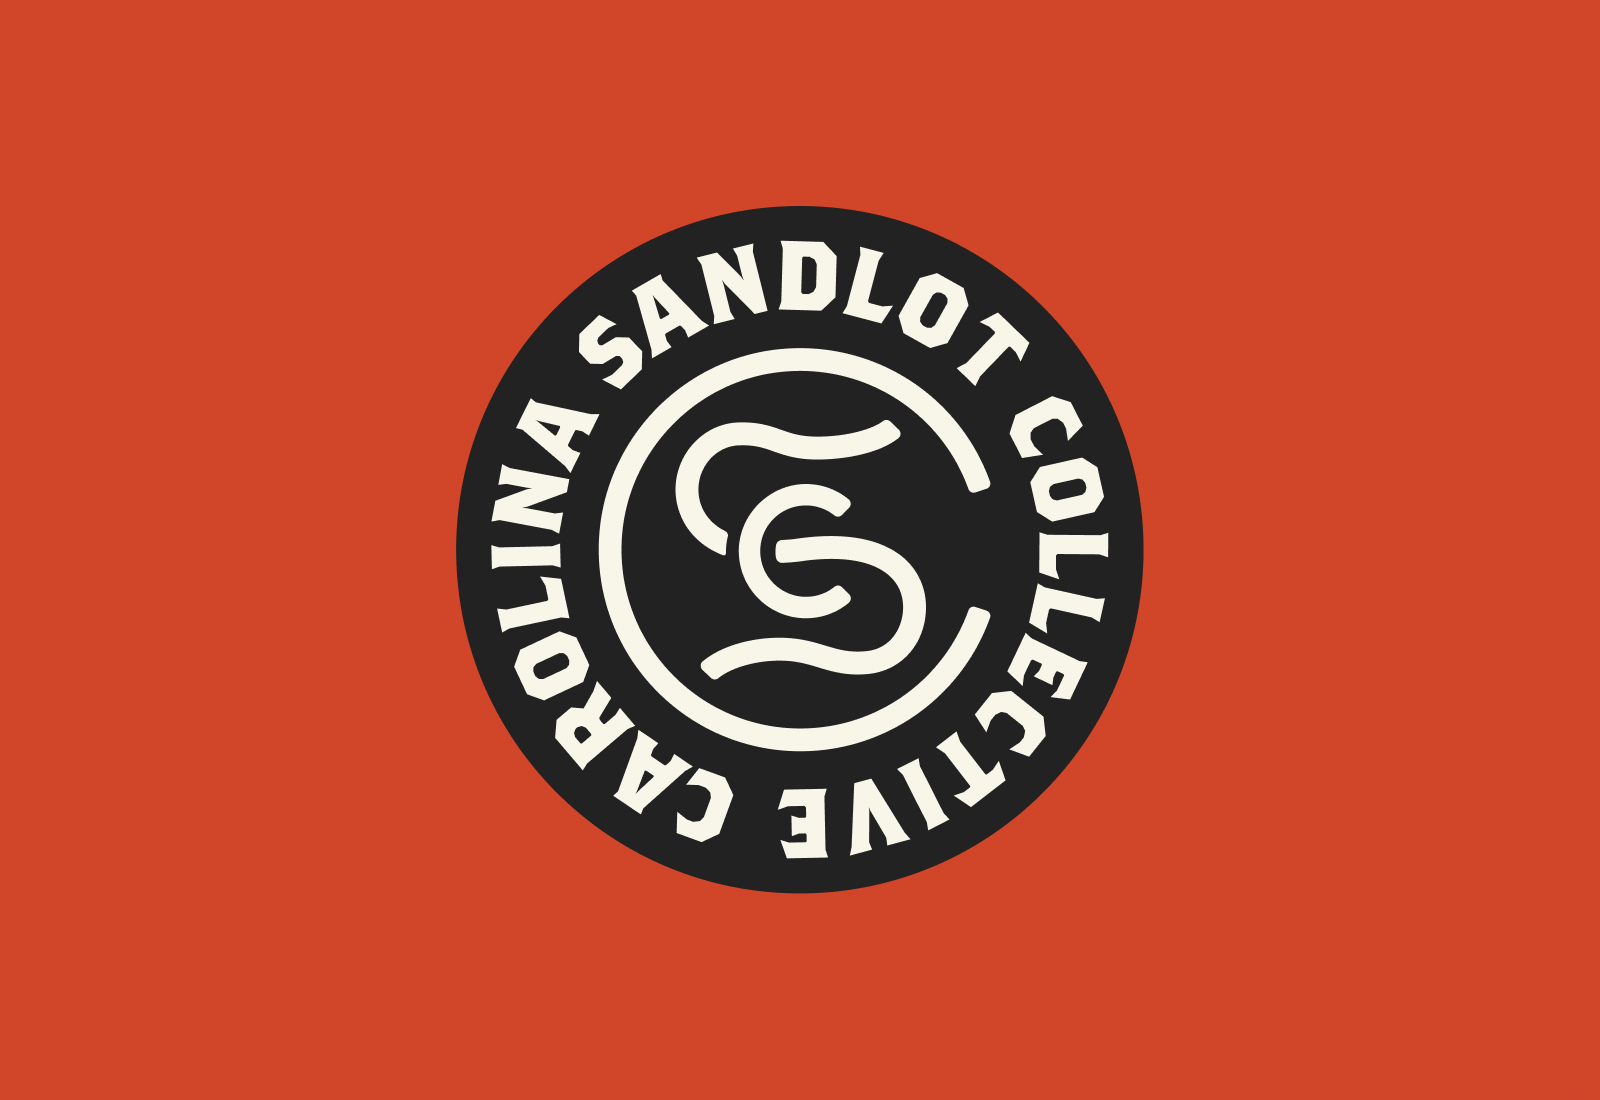 Baseball-laced CSC Monogram wrapped with Carolina Sandlot Collective | Carolina Sandlot Collective